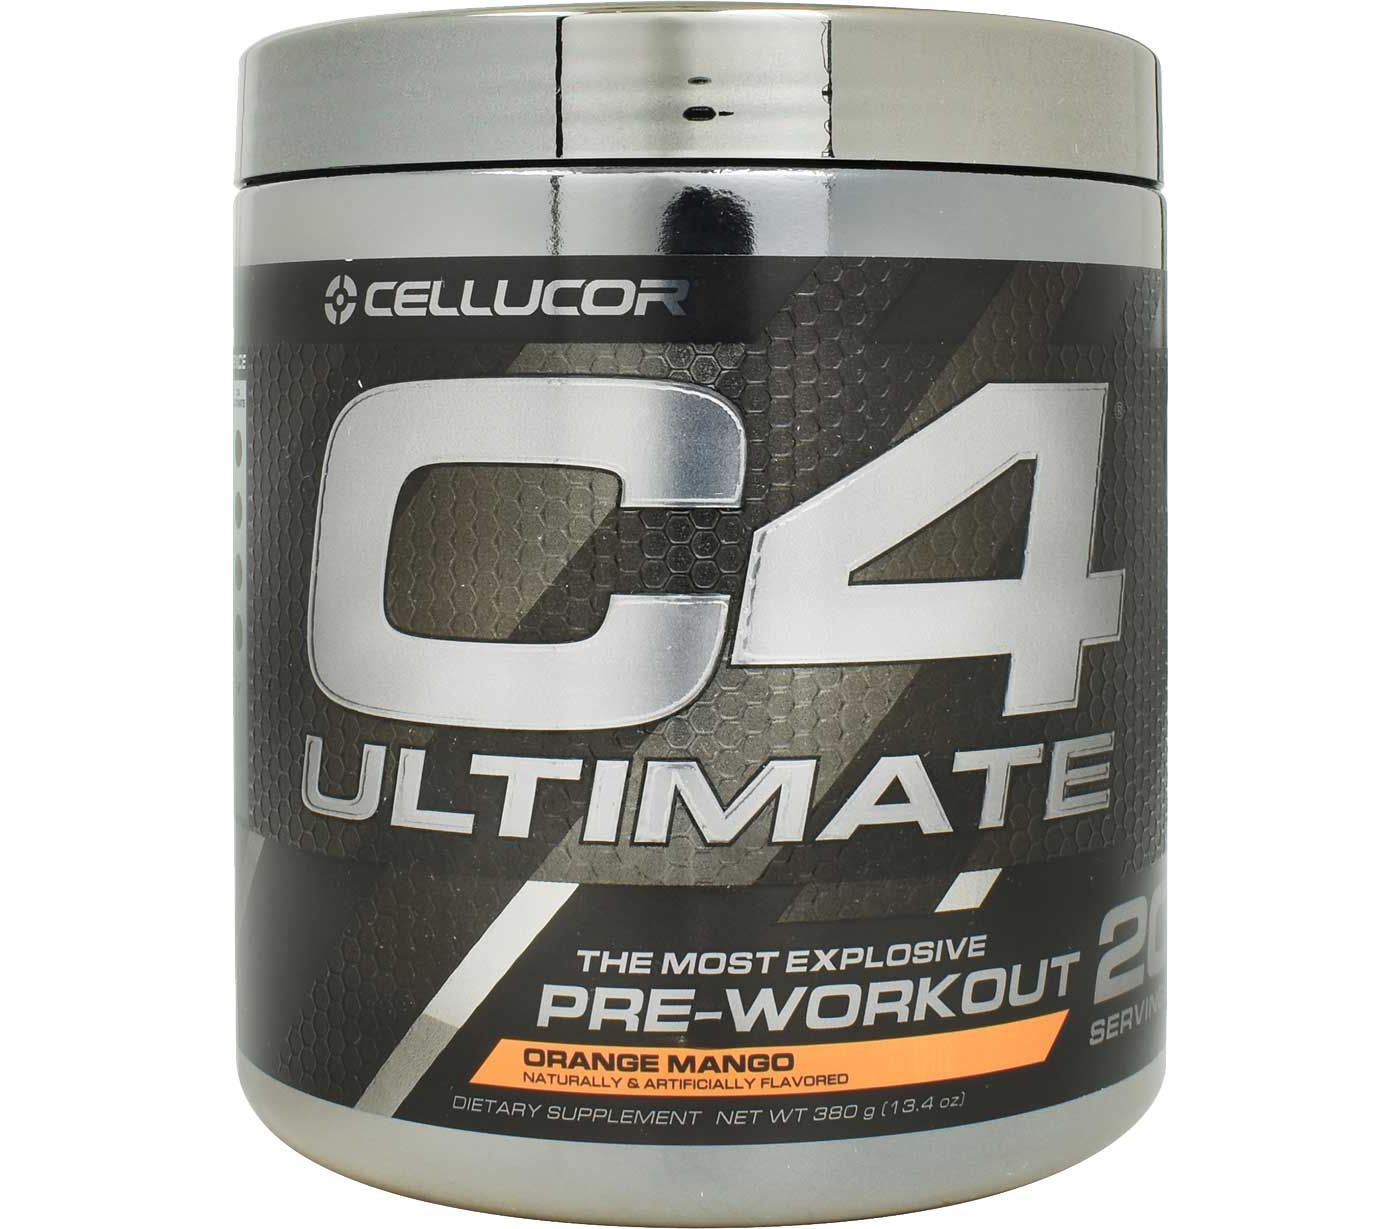 15 Minute C4 pre workout orange for push your ABS